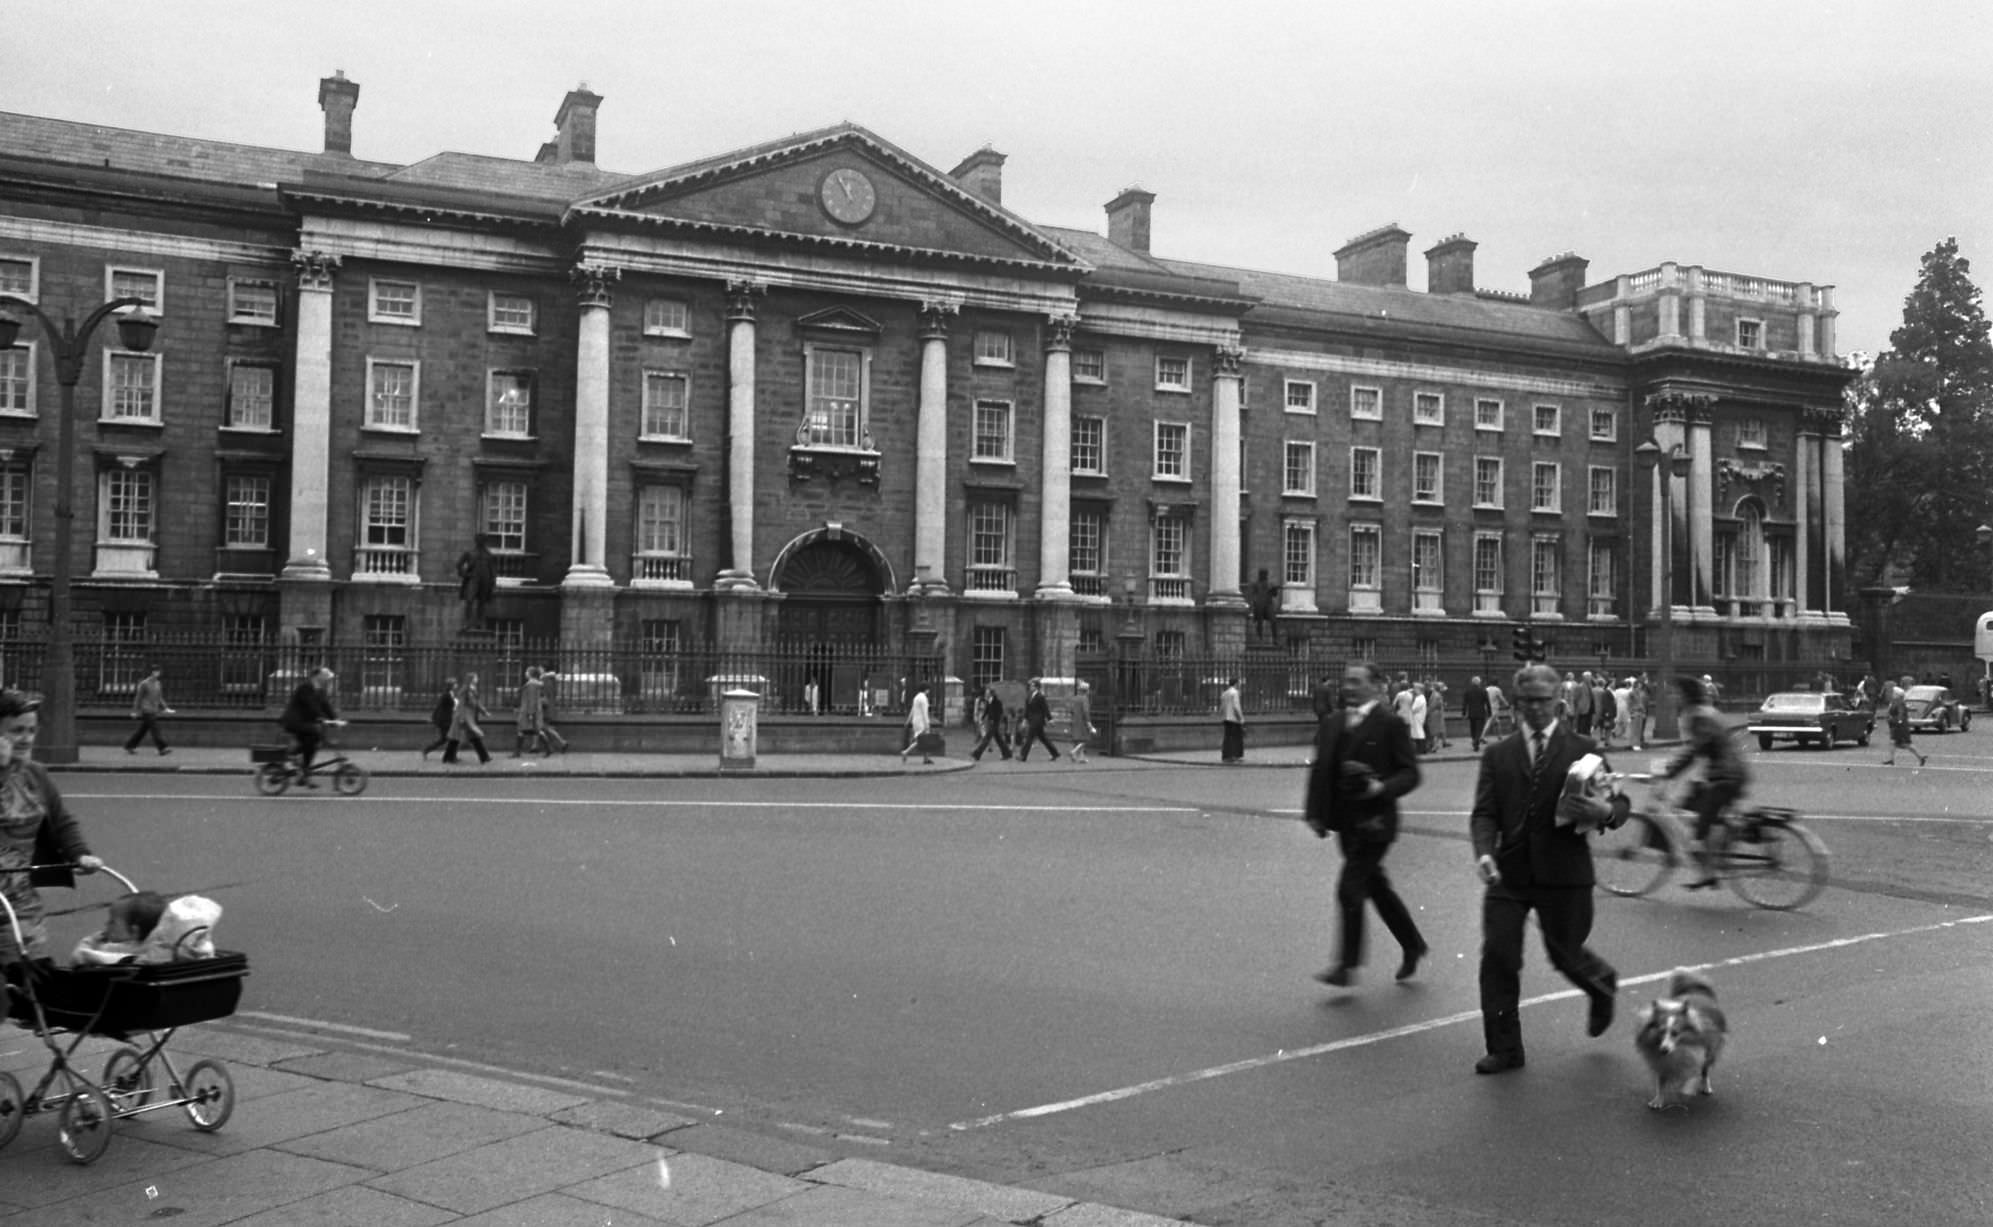 The exterior of Trinity College in September 1971